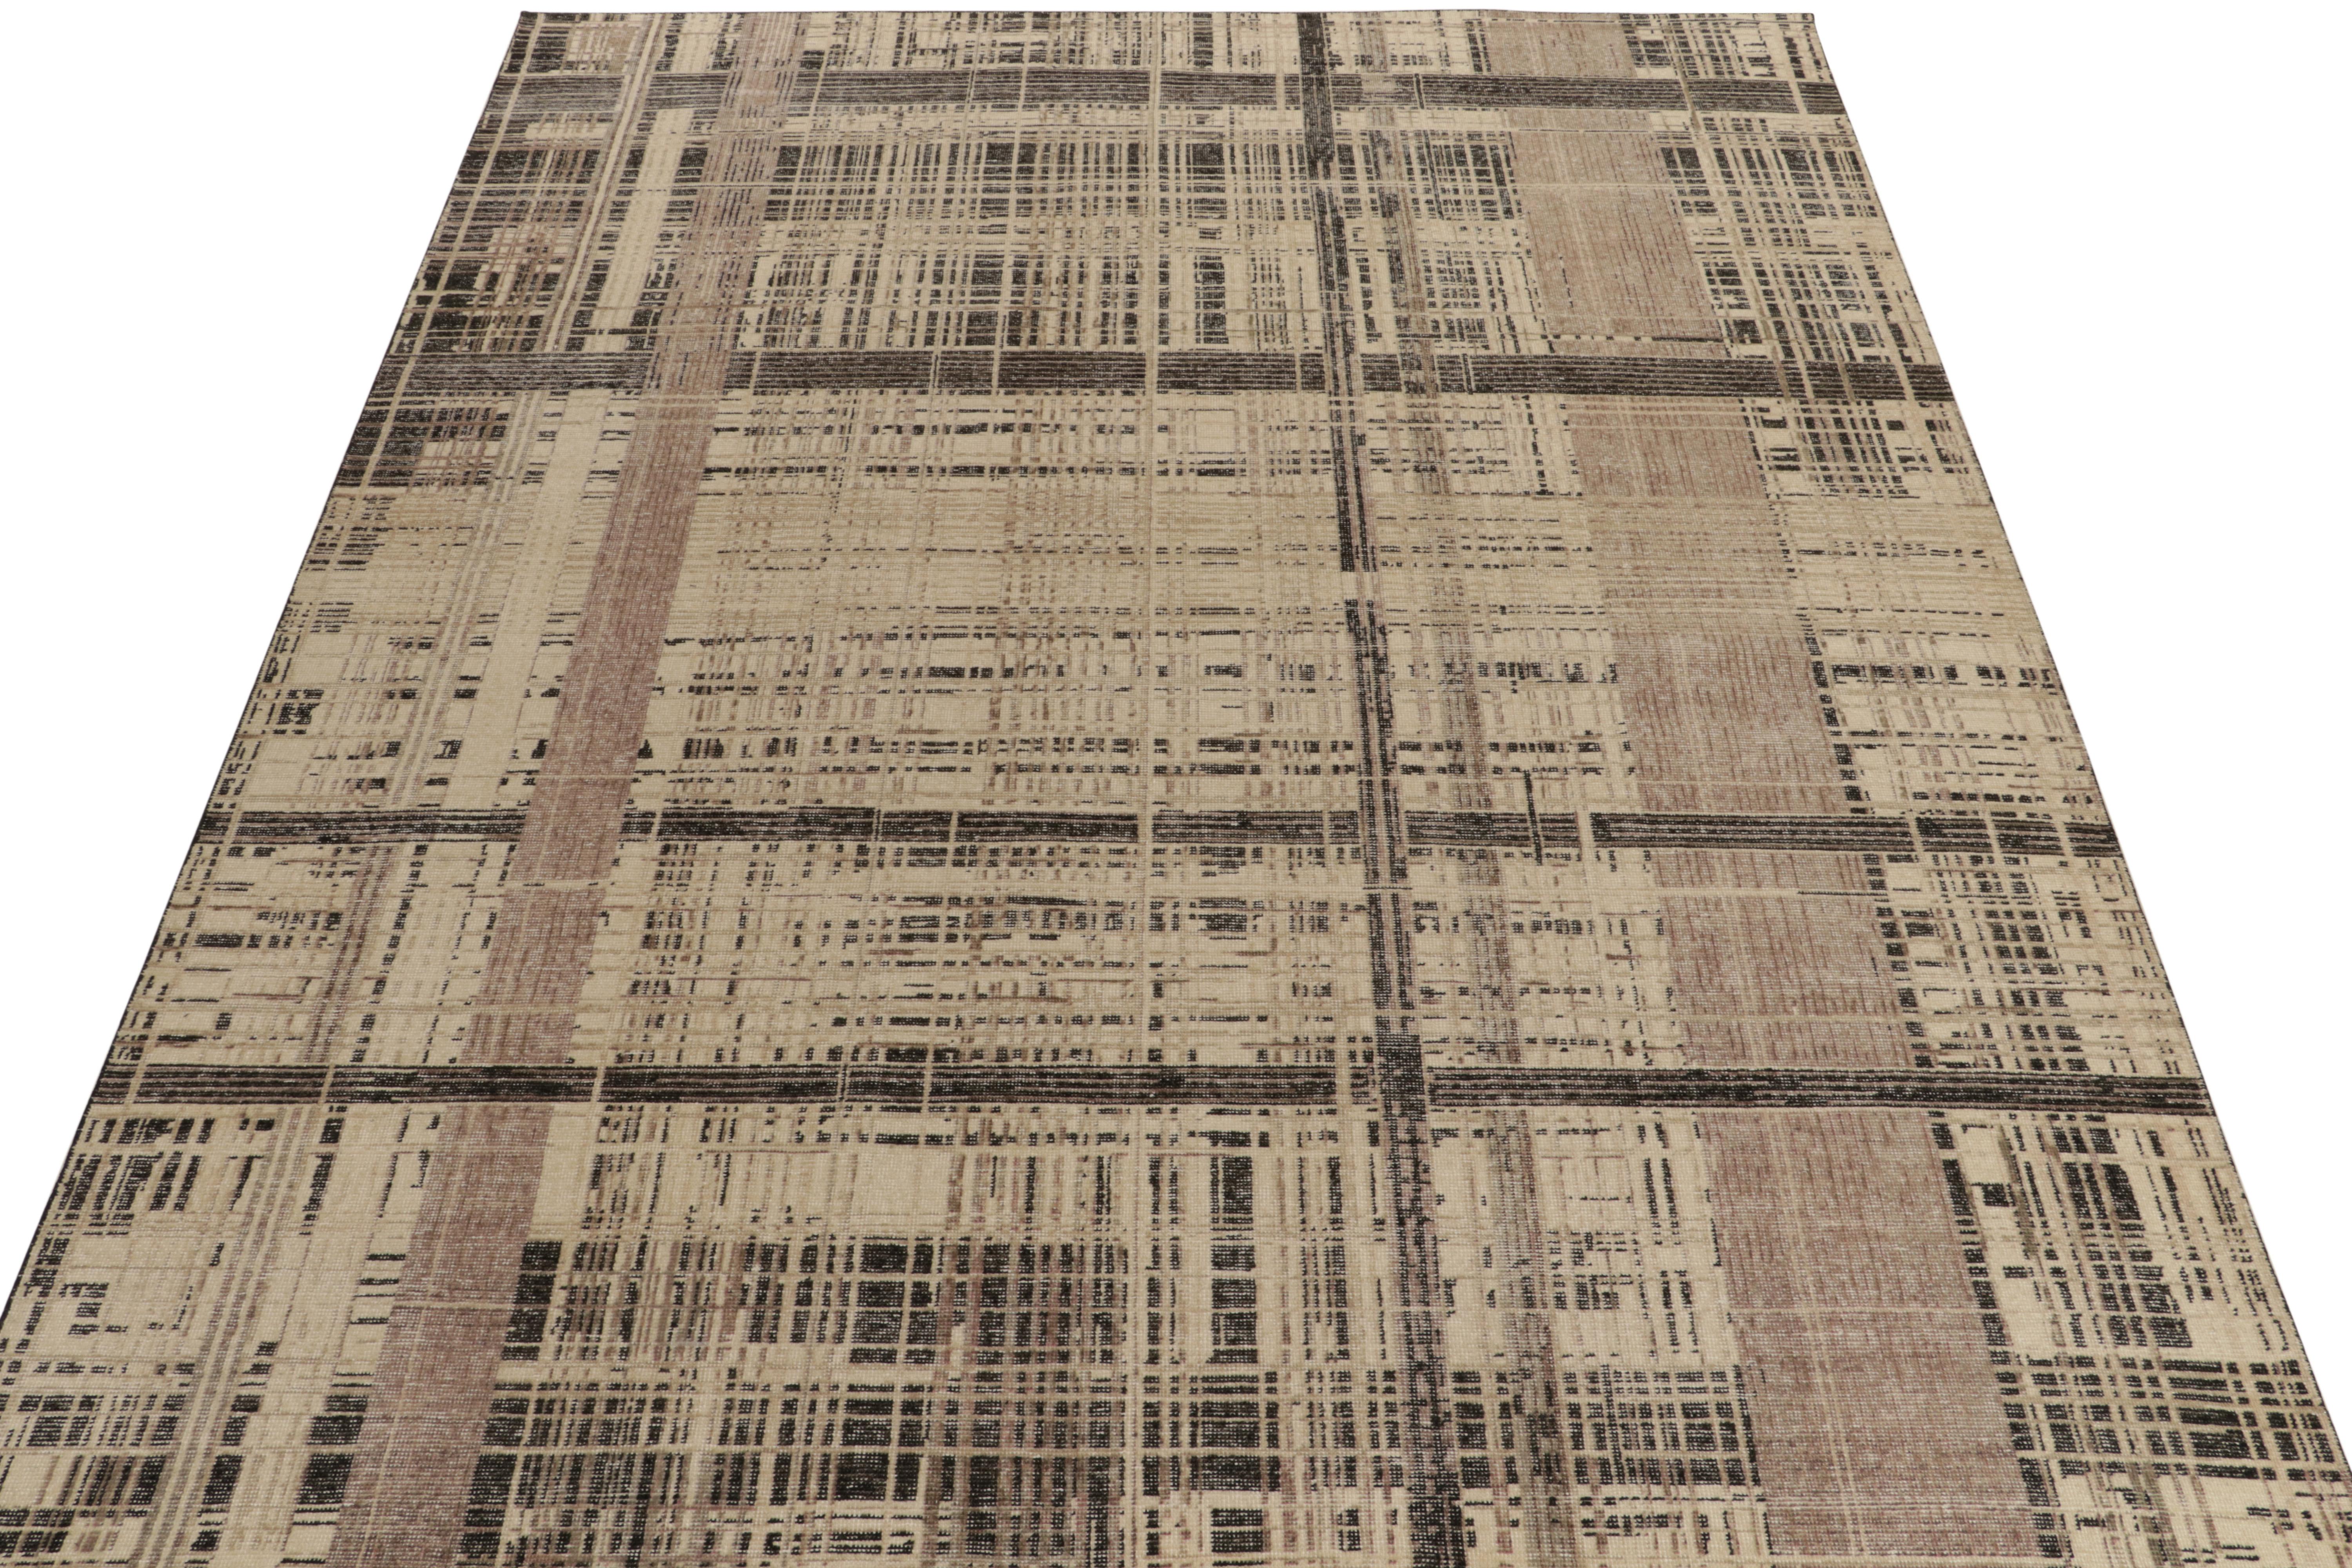 From Rug & Kilim’s Homage collection, a 9x12 distressed style abstract rug marking a dextrous take on contemporary styles. The imagination applies geometry in muted beige, brown & charcoal black striations playing on a low sheared pile for